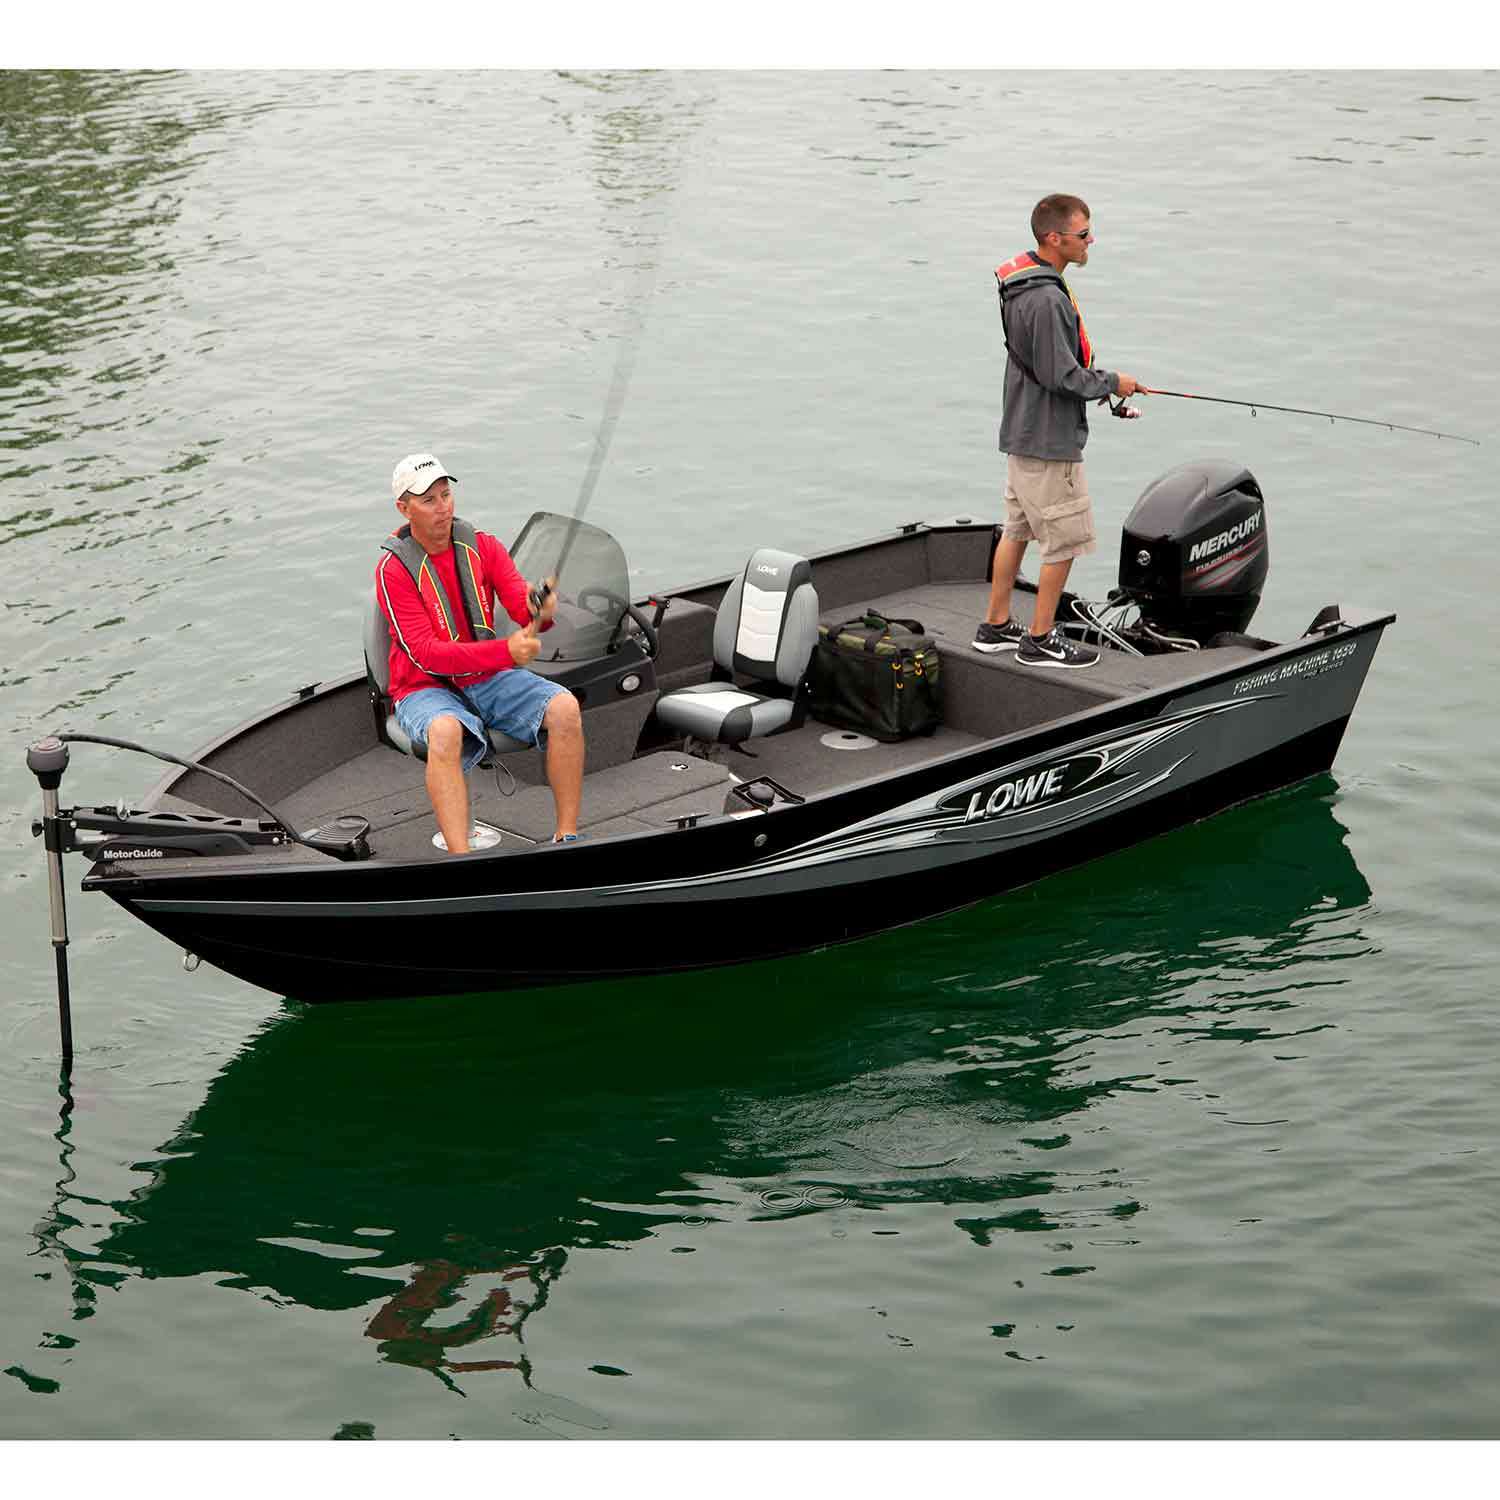 MotorGuide X3 Foot-Controlled Bow Mount Trolling Motor